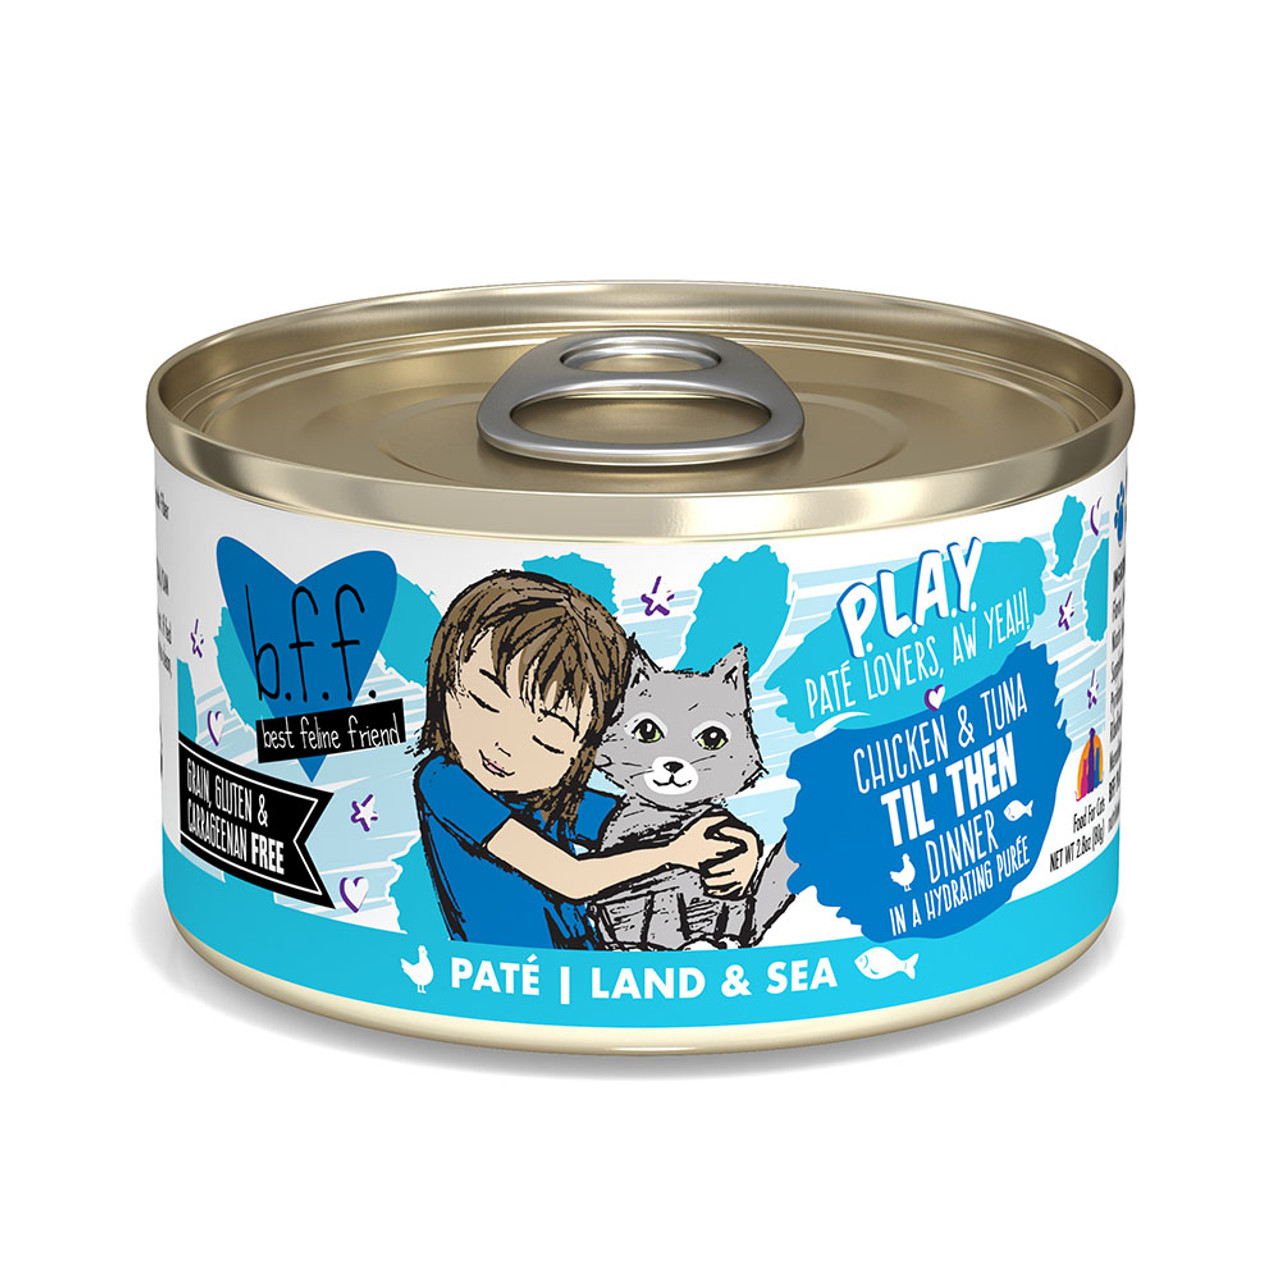 B.F.F. PLAY Chicken & Tuna Til' Then Pate Recipe Canned Cat Food - Front